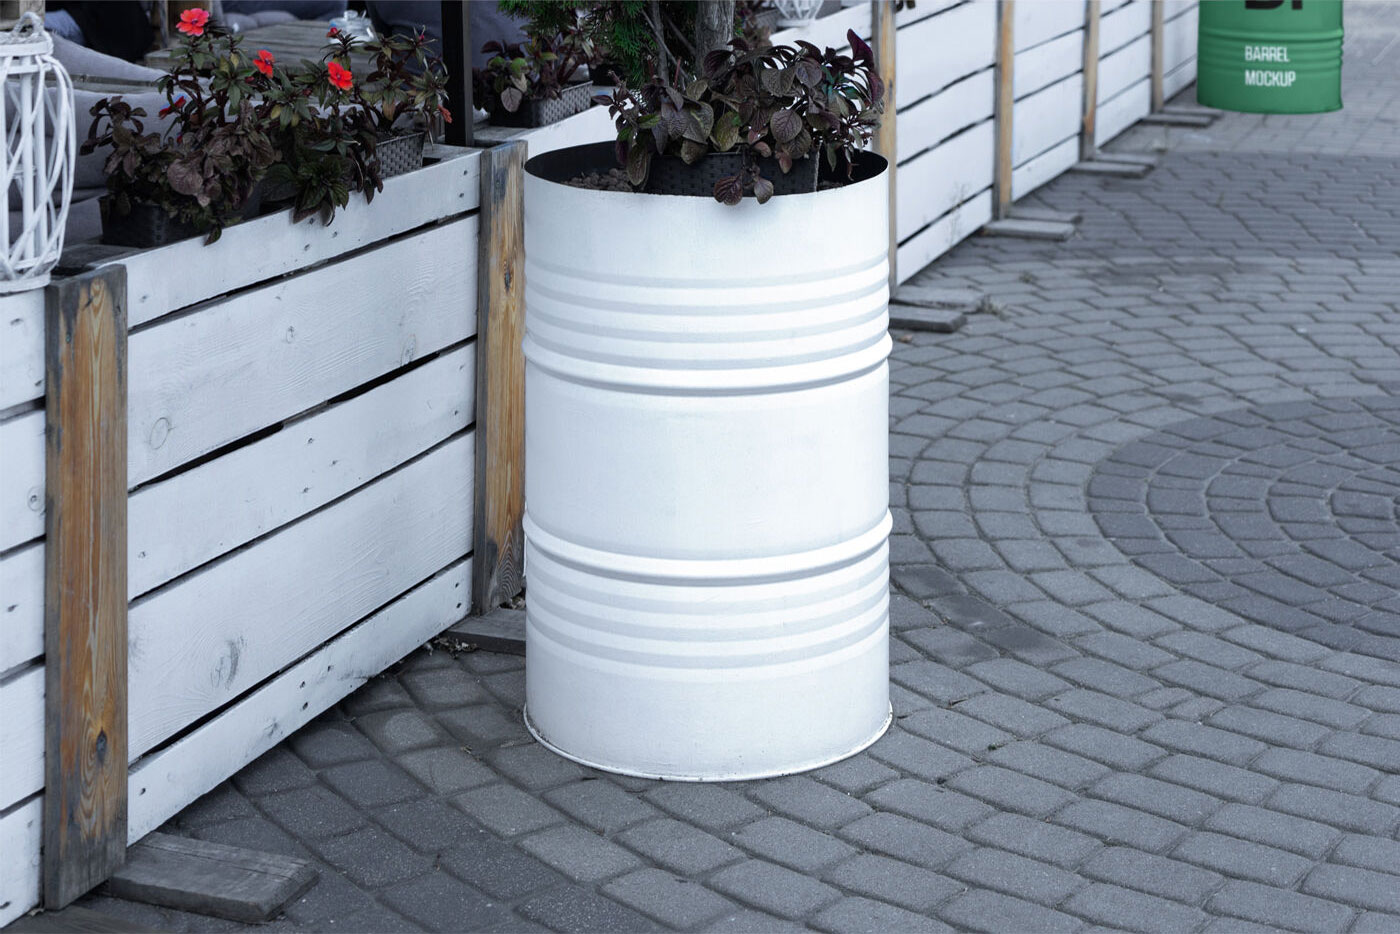 Front View of Barrel in Clean Street Mockup FREE PSD